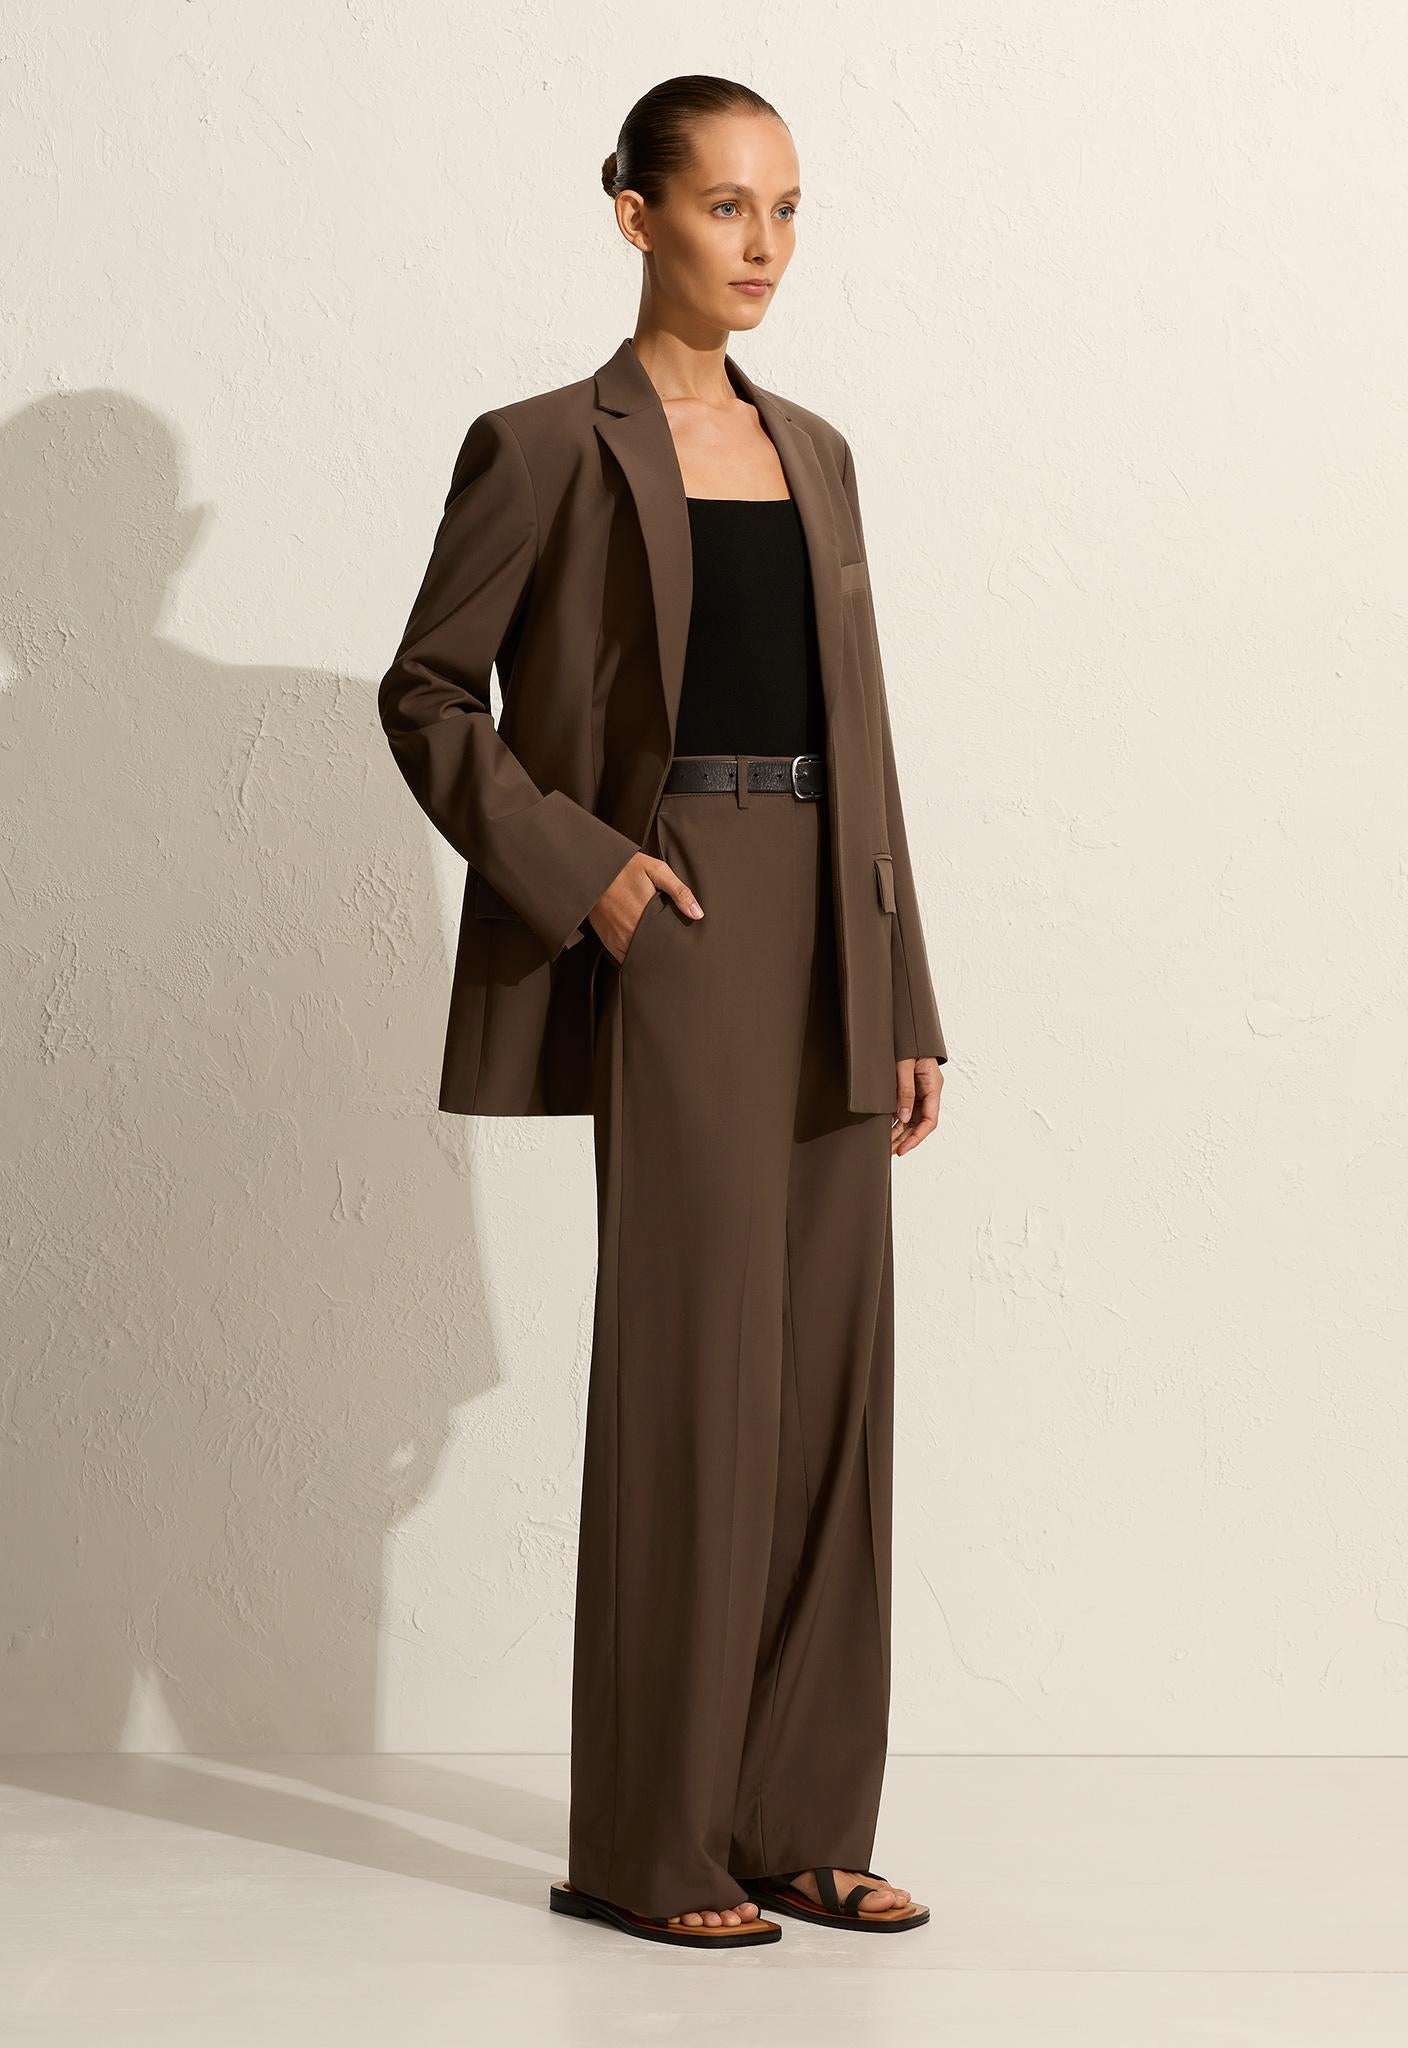 Relaxed Tailored Blazer - Coffee - Matteau